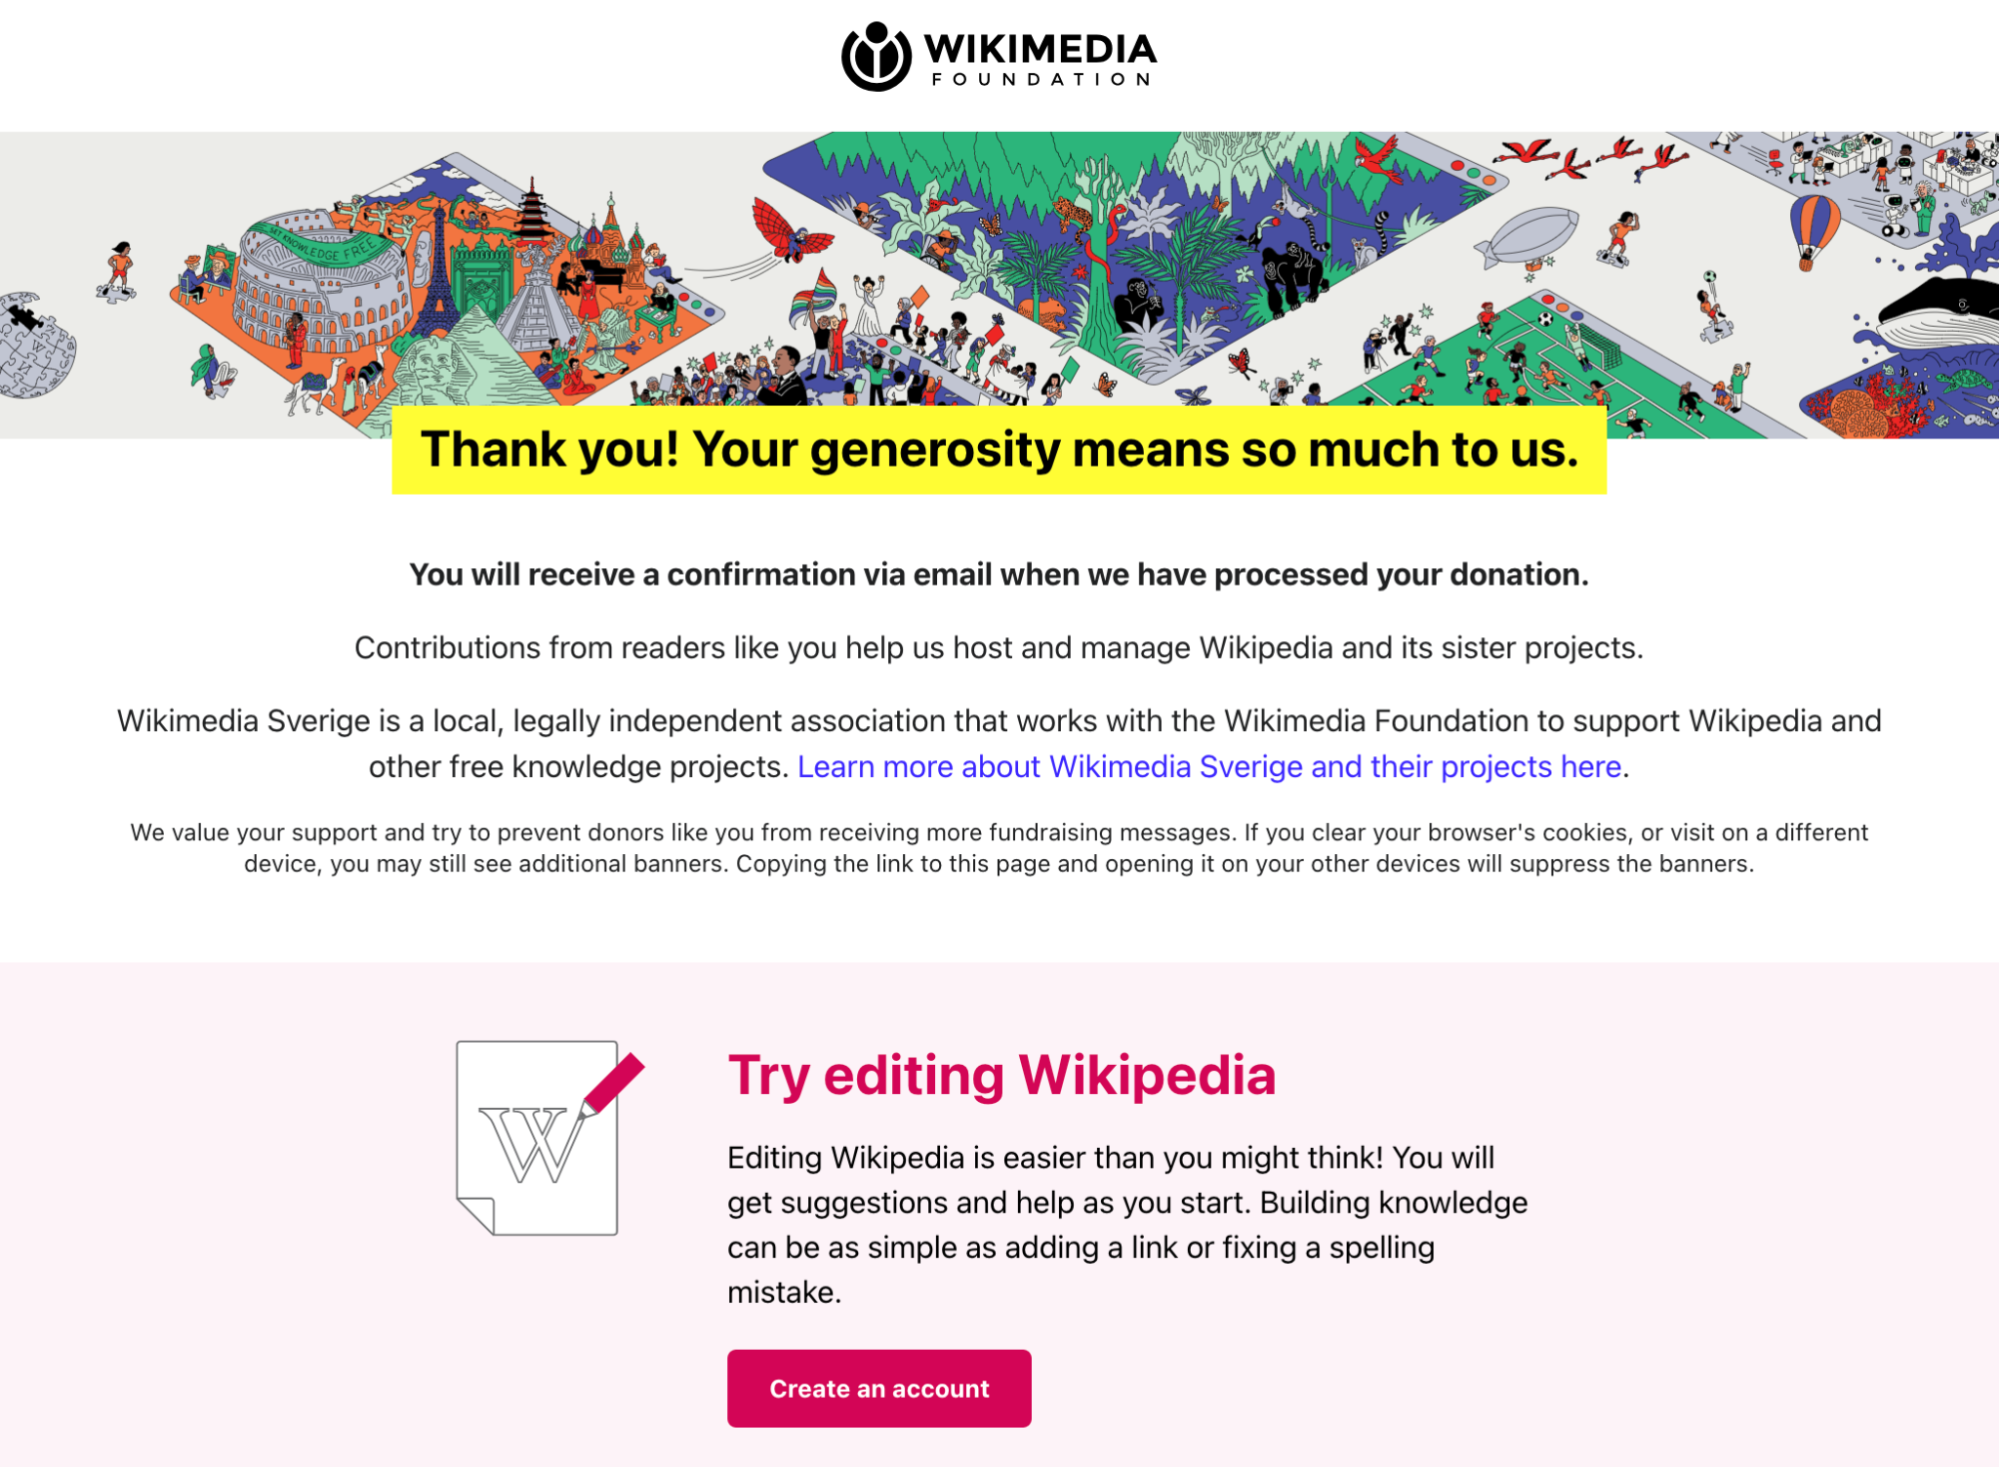 Example of post-donation Thank You Page for Sweden, with an invitation to edit Wikipedia.